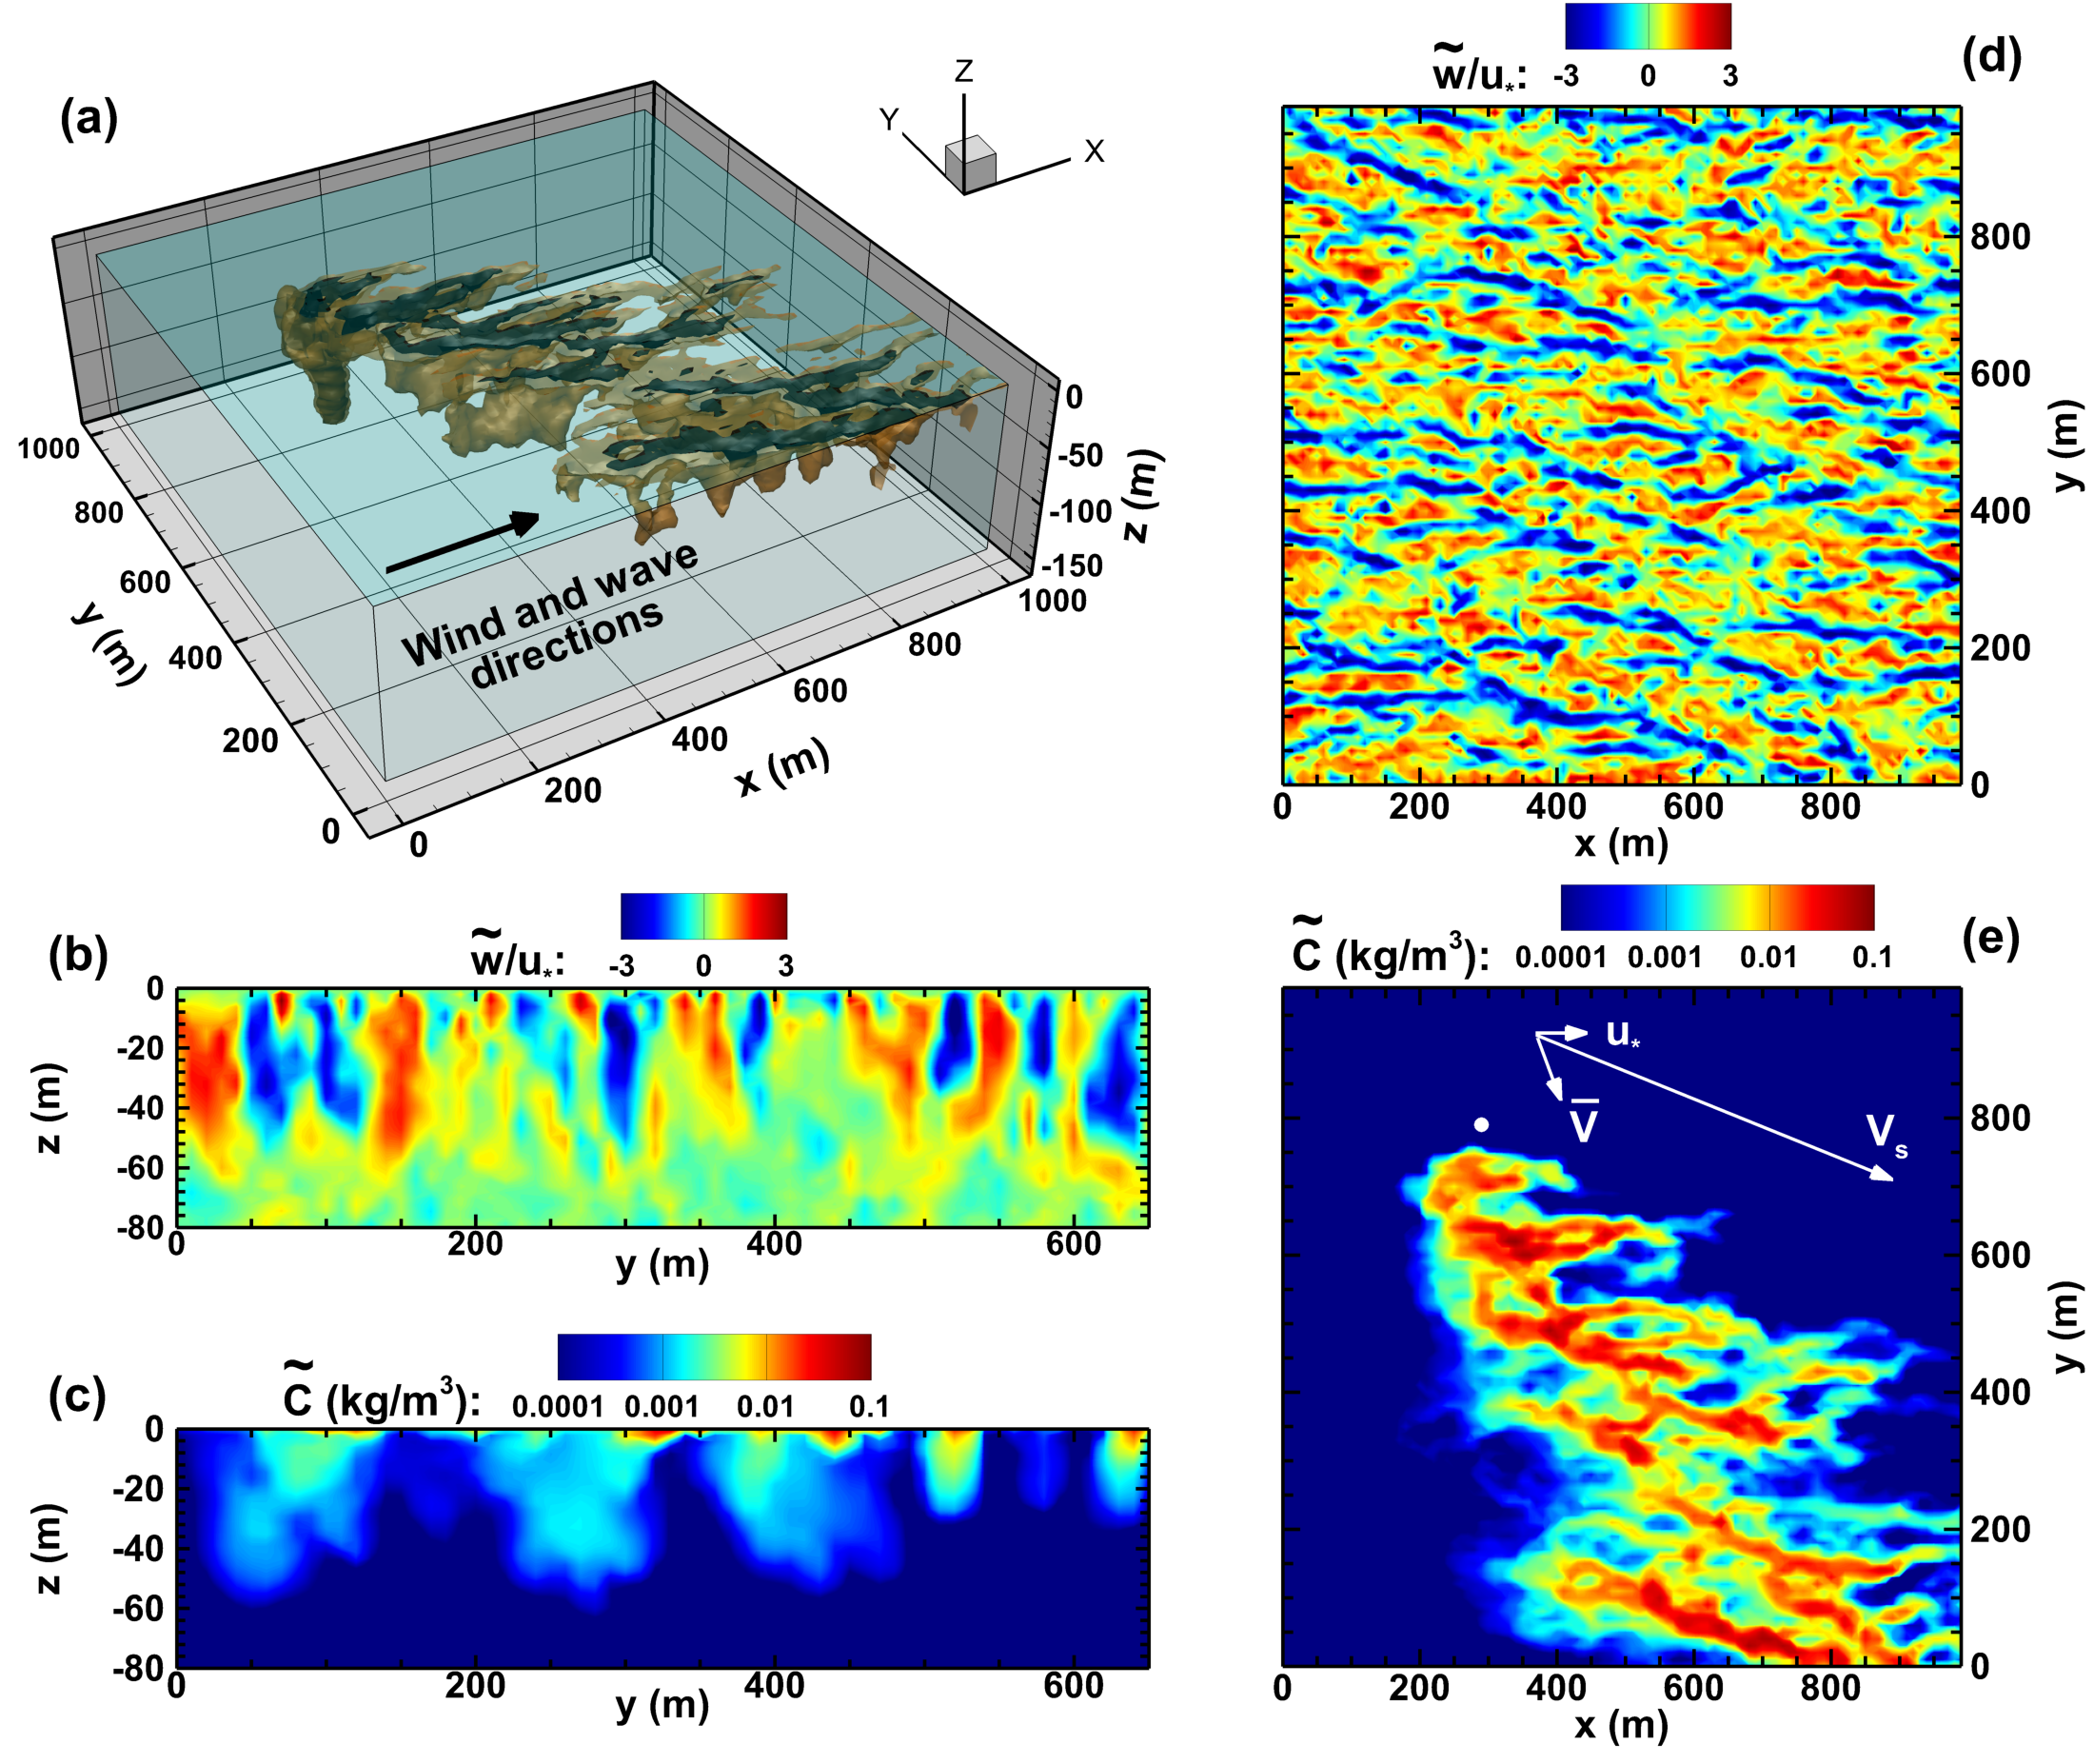 Overview of LES results modeling oil spill dispersion in the ocean mixed layer with the presence of Langmuir circulation.  (a) Three-dimensional isosurfaces of oil concentration C=0.008 kg/m^3 (brown) and 0.016 kg/m^3 (black).  (b) Contours of vertical velocity w at x=500m.  (c) Contours of oil concentration C at x=500m.  (d) Contours of vertical velocity w at z=−10m.  (e) Contours of oil concentration C at z=0m.   In panel (e), reference vectors for friction velocity u∗, mean surface flow velocity Vs, and mean depth-averaged (over OML) flow velocity V are plotted.